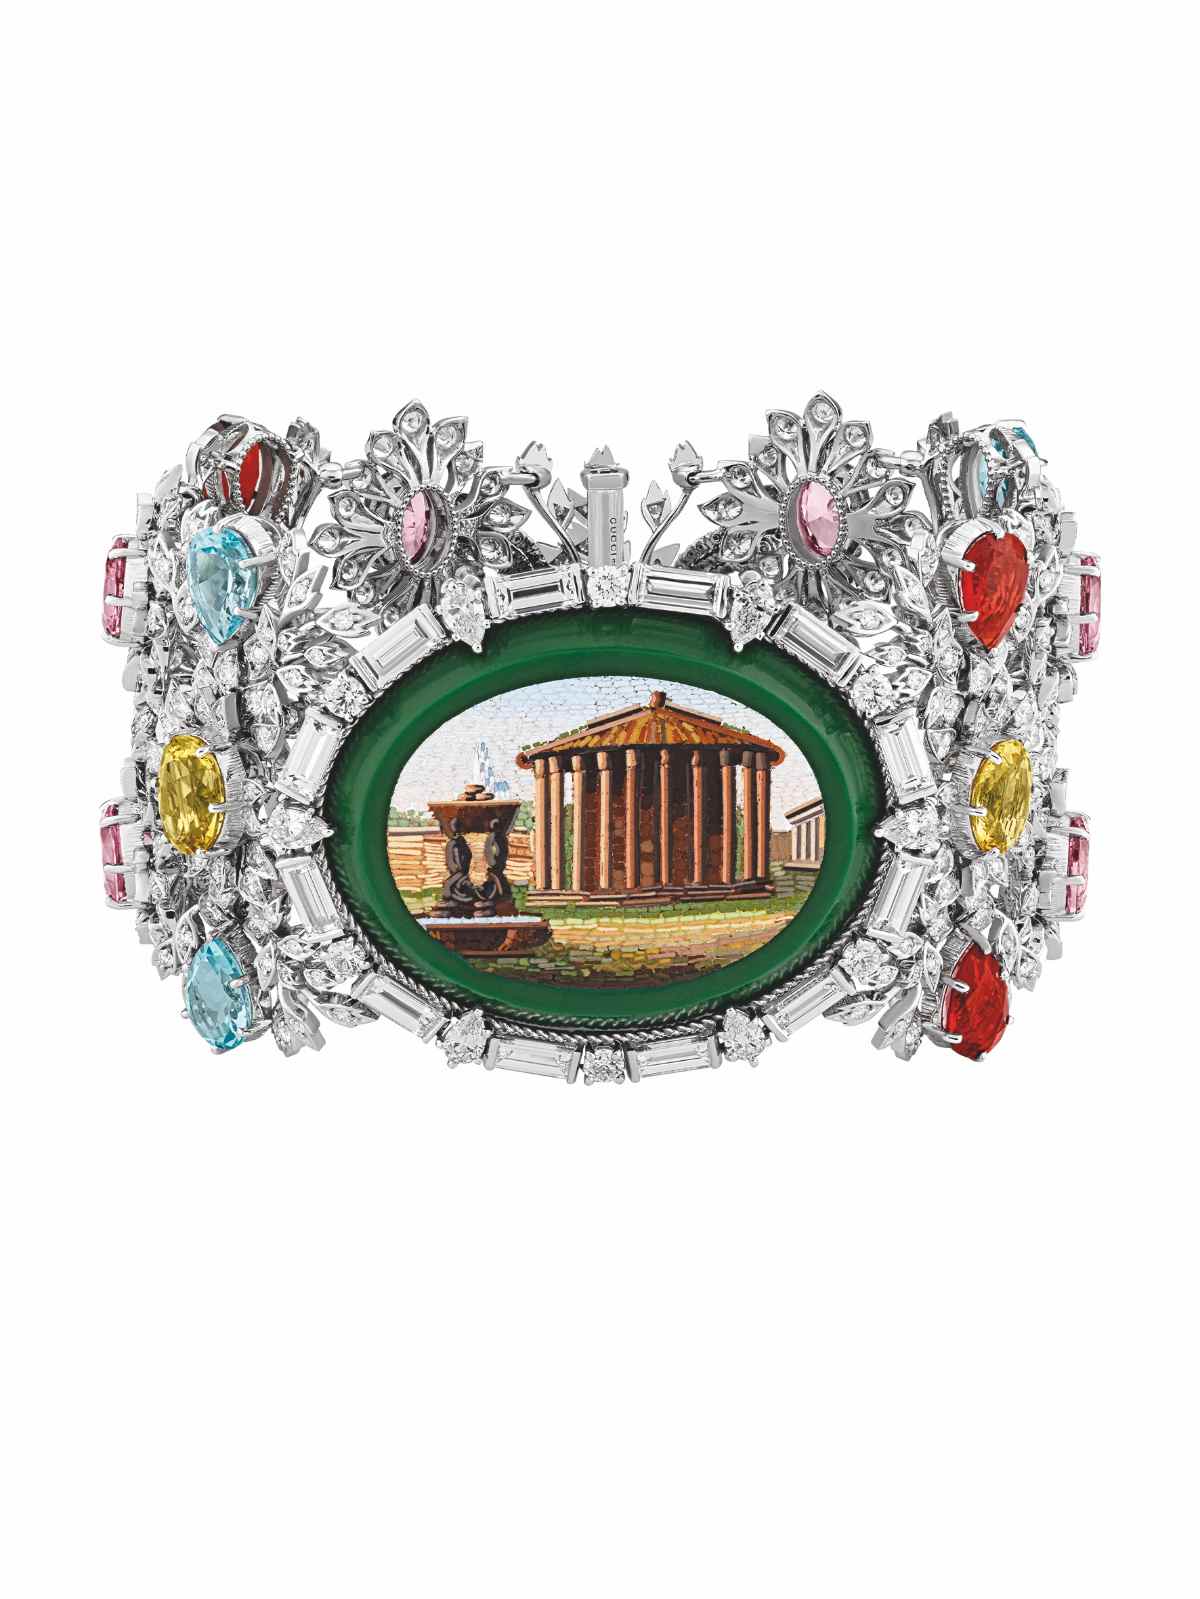 Hortus Deliciarum: The New Gucci High Jewelry Collection